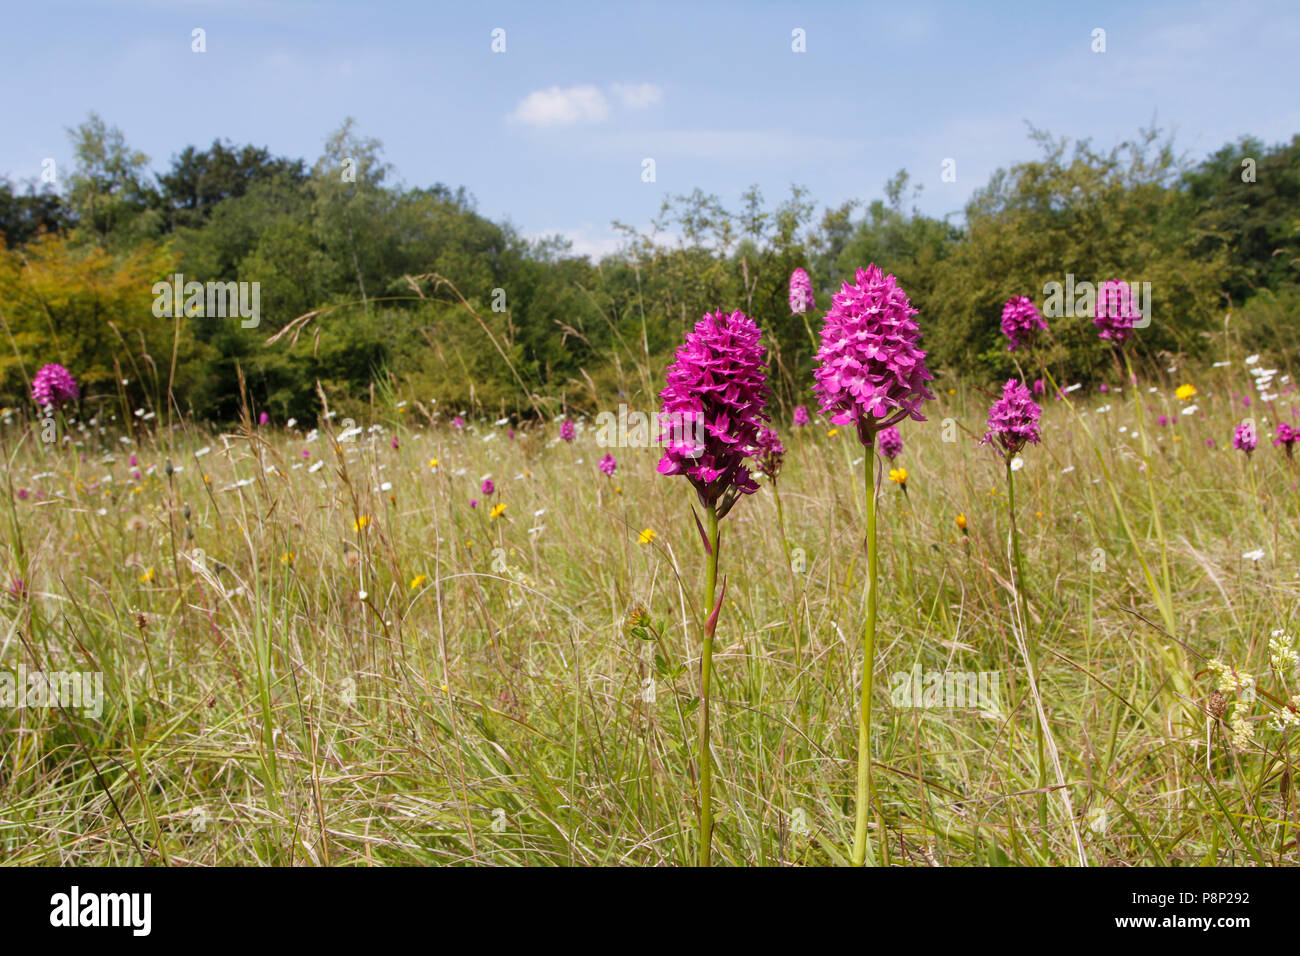 Pyramidal orchids in their natural habitat Stock Photo